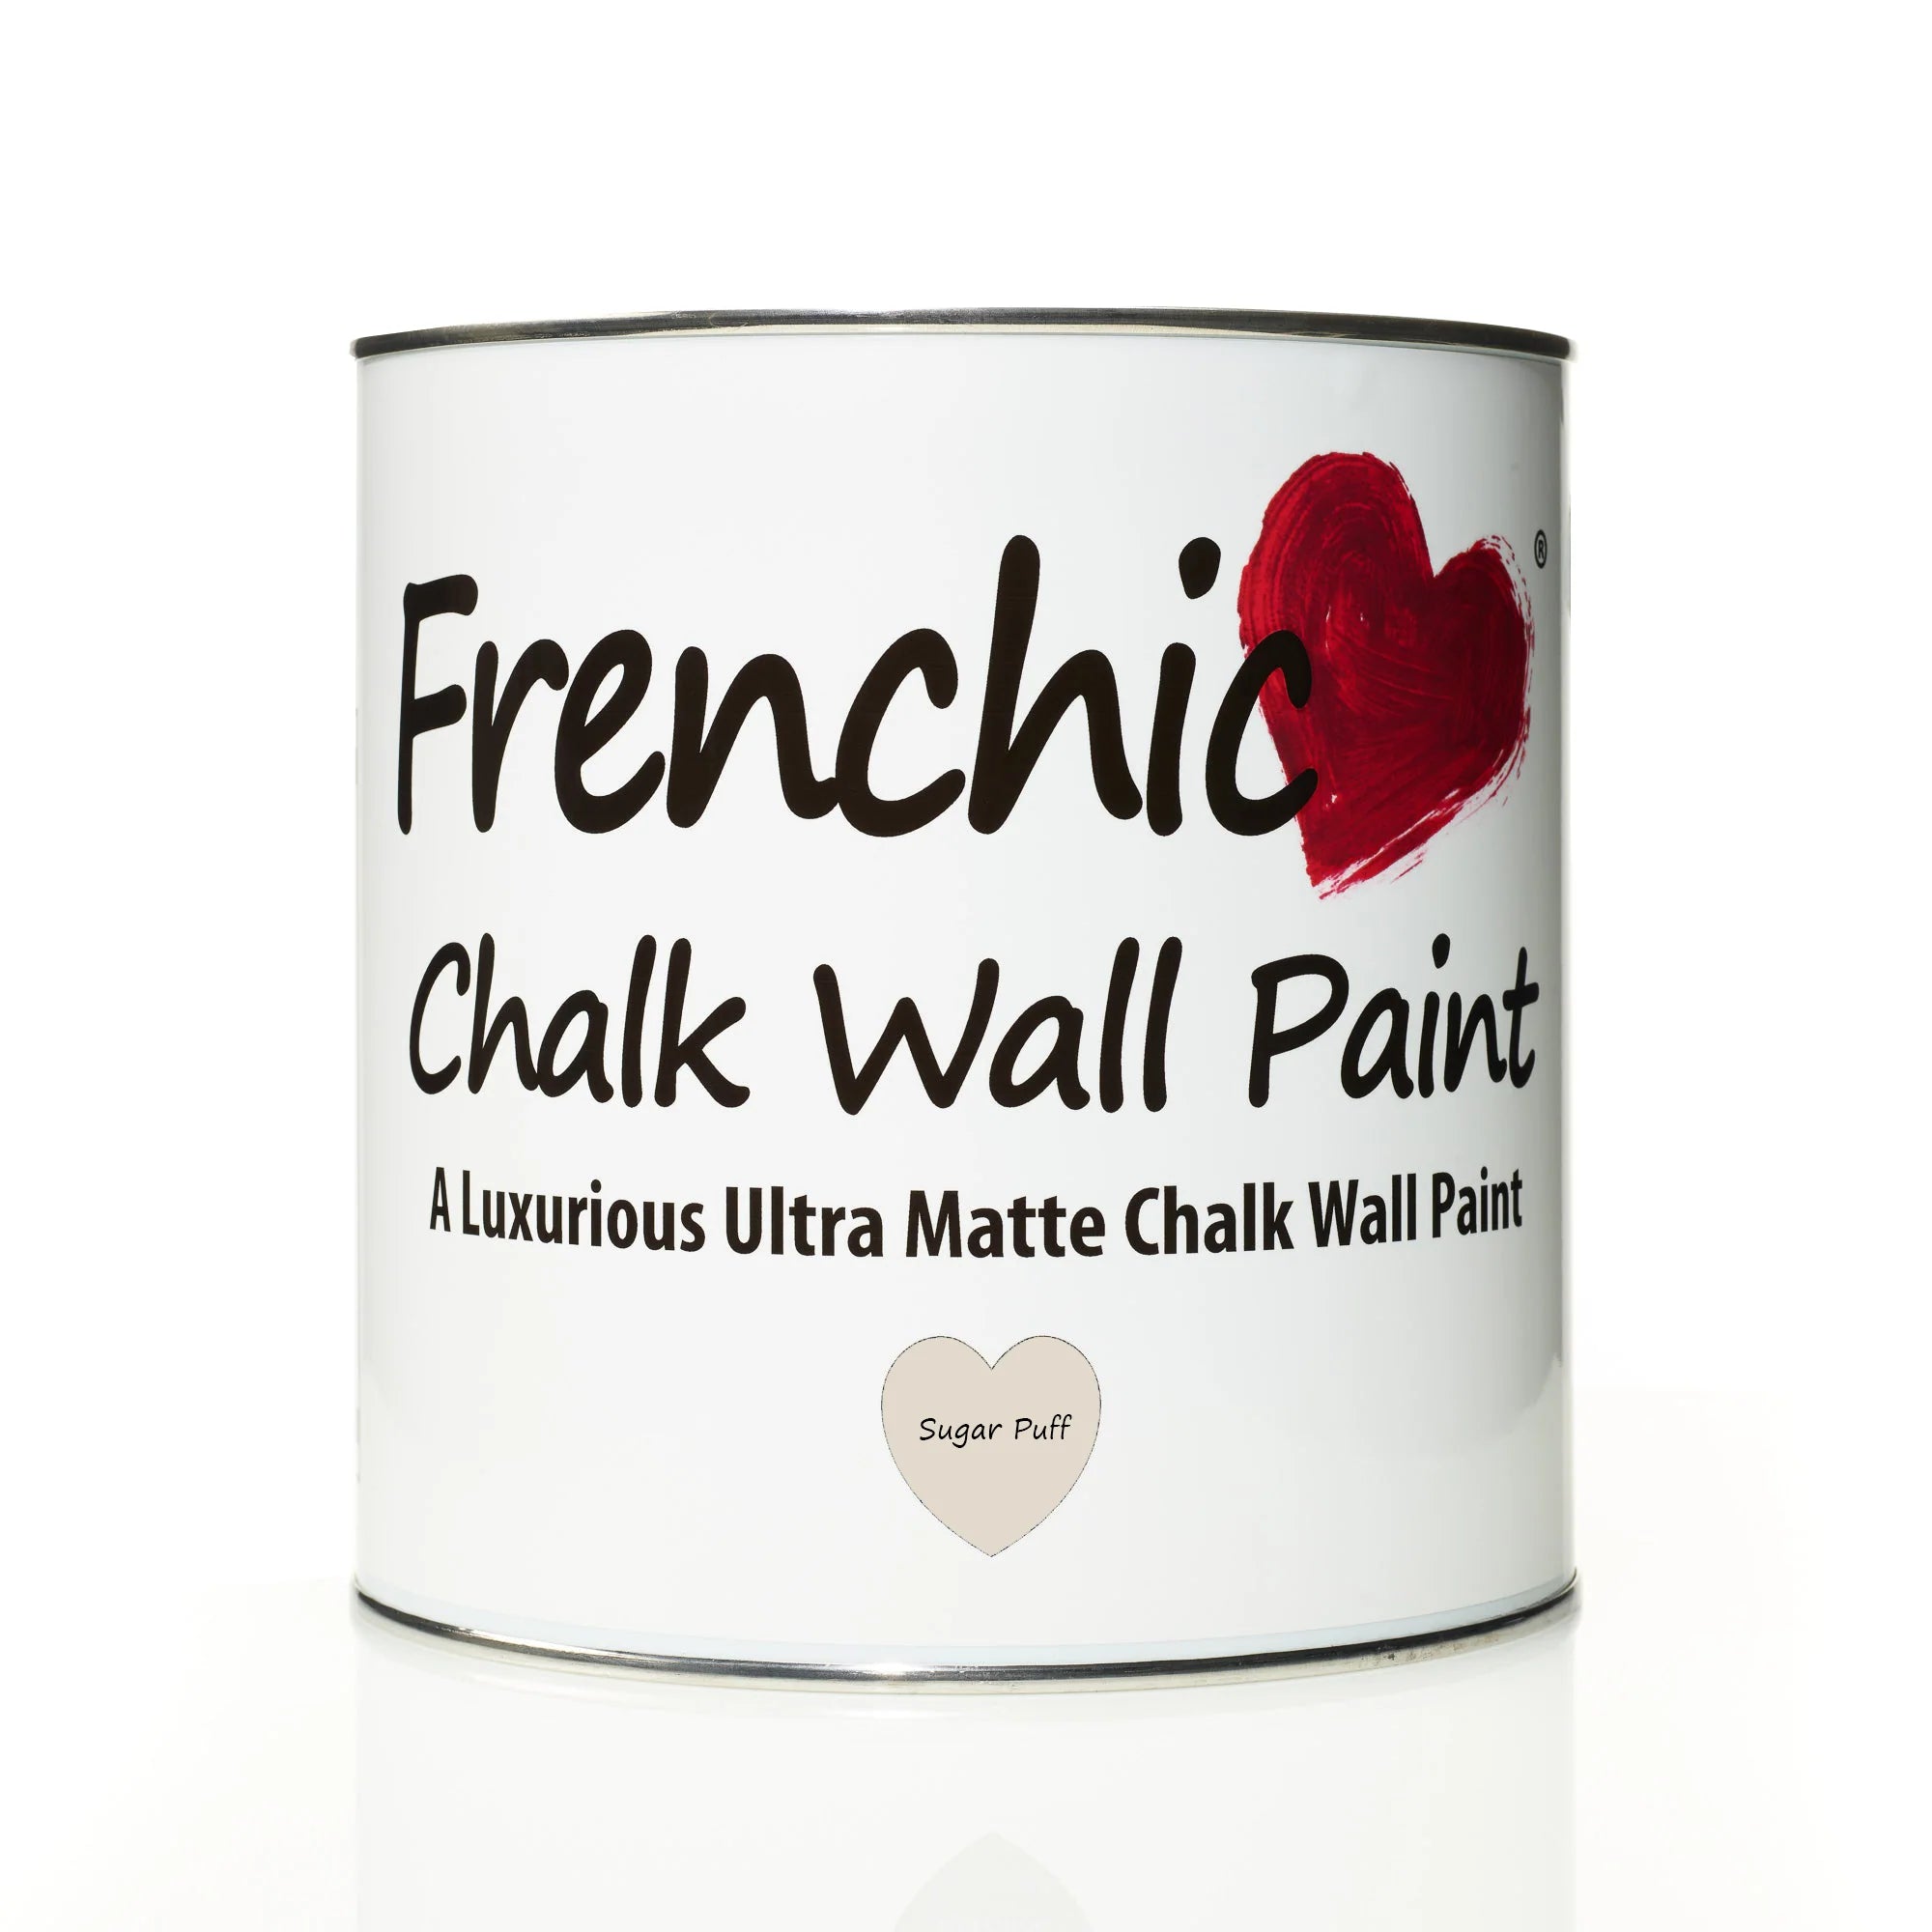 Frenchic Paint Sugar Puff Wall Paint 2.5L Frenchic Paint Chalk Wall Paint Range by Weirs of Baggot Street Irelands Largest and most Trusted Stockist of Frenchic Paint. Shop online for Nationwide and Same Day Dublin Delivery